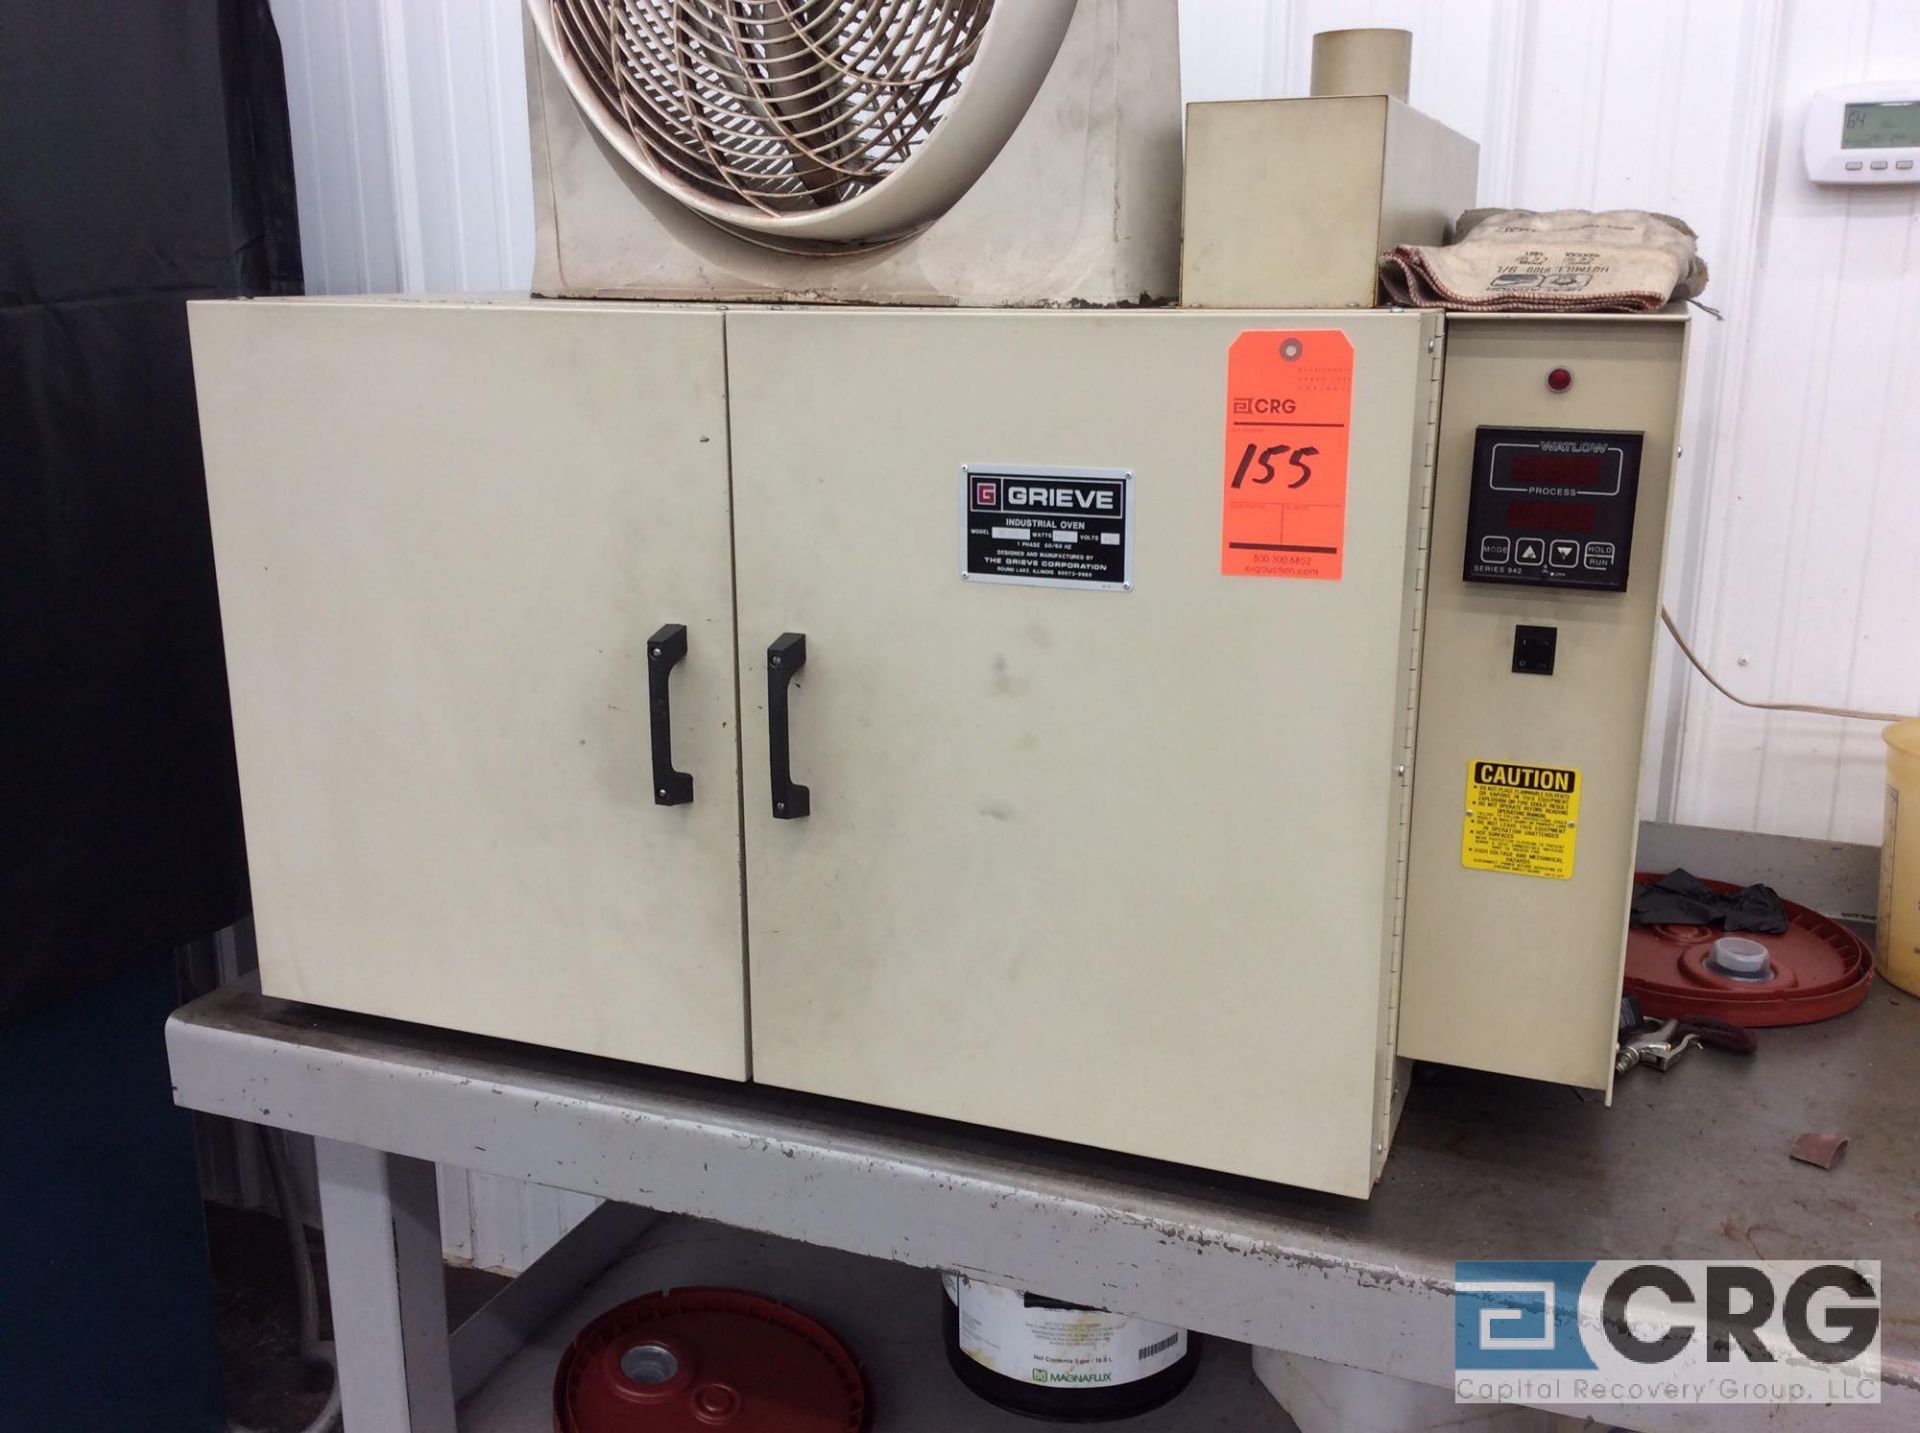 Grieve Industrial oven, mn NB-350, 2000 watts, 208 volts, 3 phase, 28 wide x 18 high x 24 deep